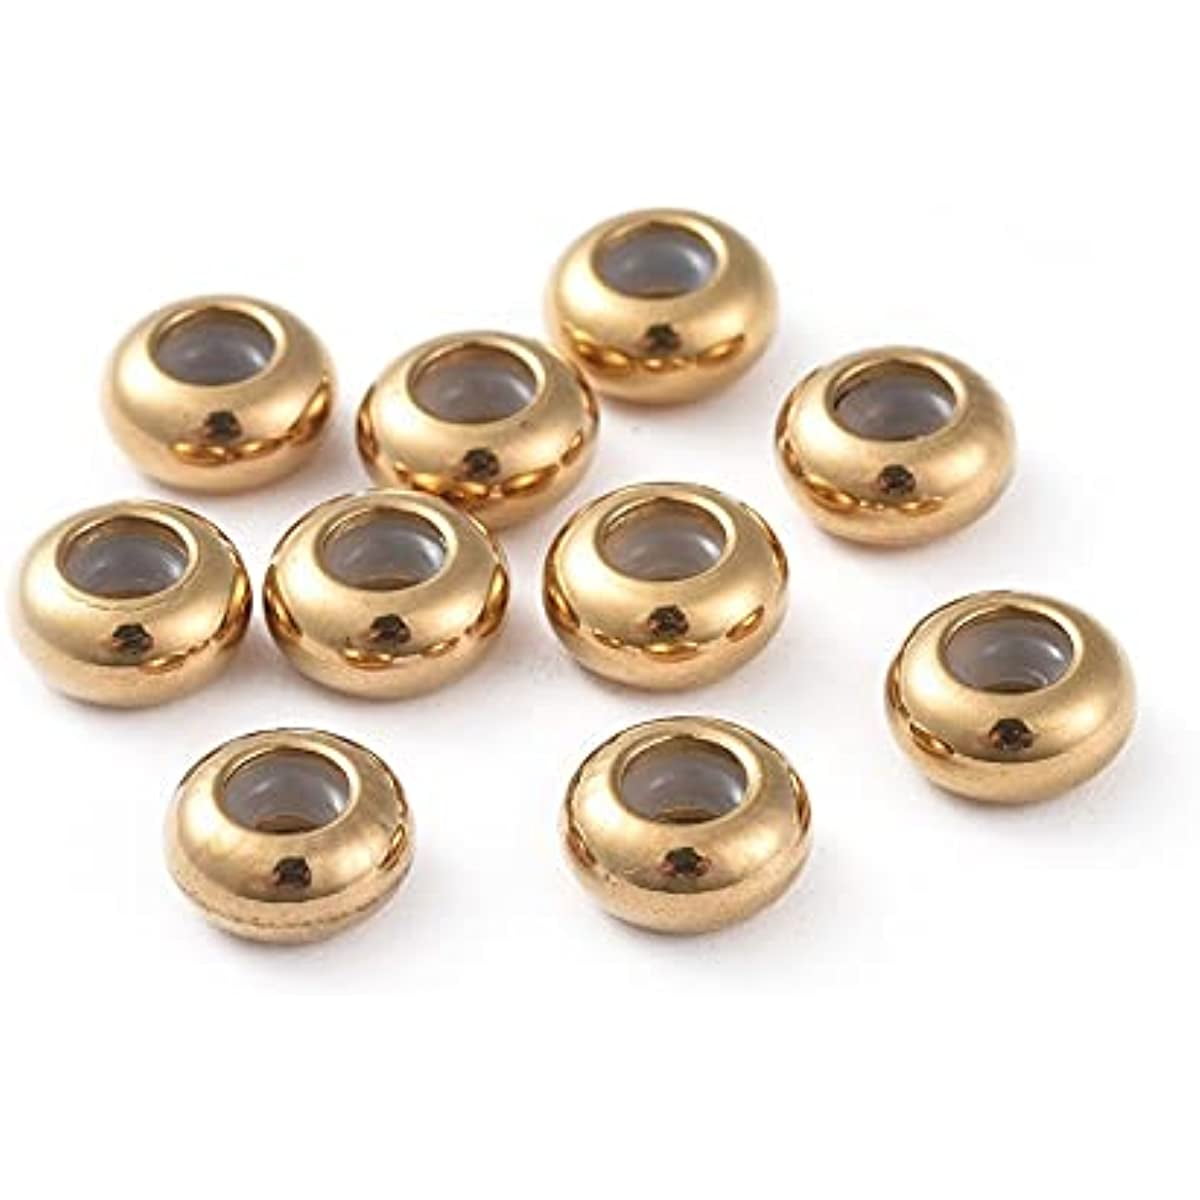 8mm Glossy Finish Silver Plated Brass Round/Ball Shaped Metal Spacer Beads  with 1mm Holes - Loose, Sold in Pre-Packed Bags of 20 Beads